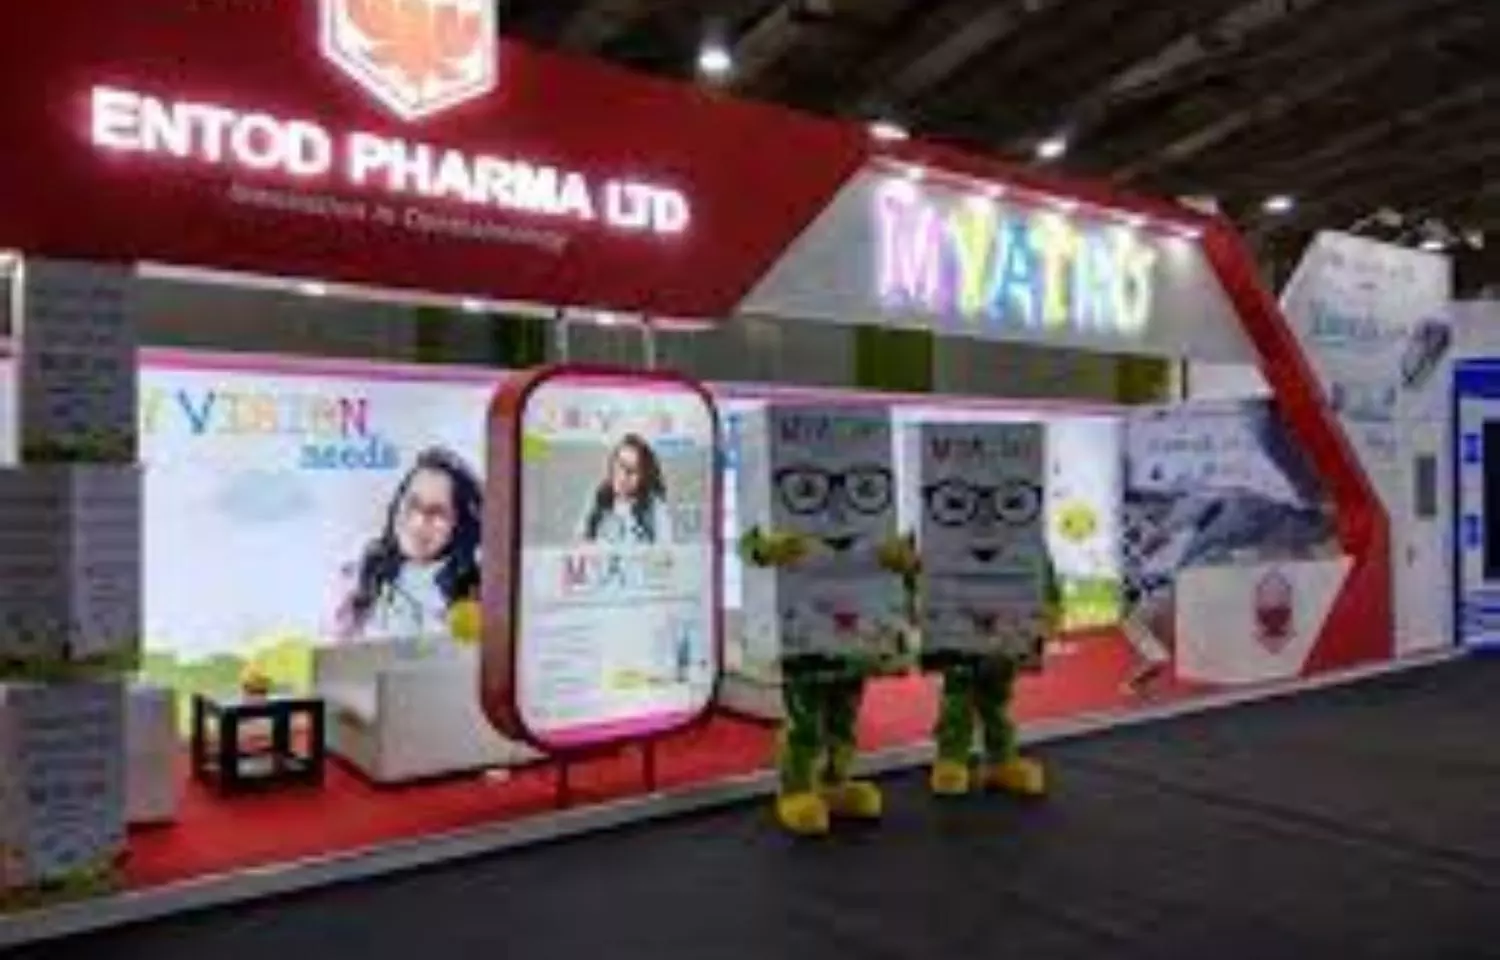 ENTOD Pharma launches dermatological venture in India